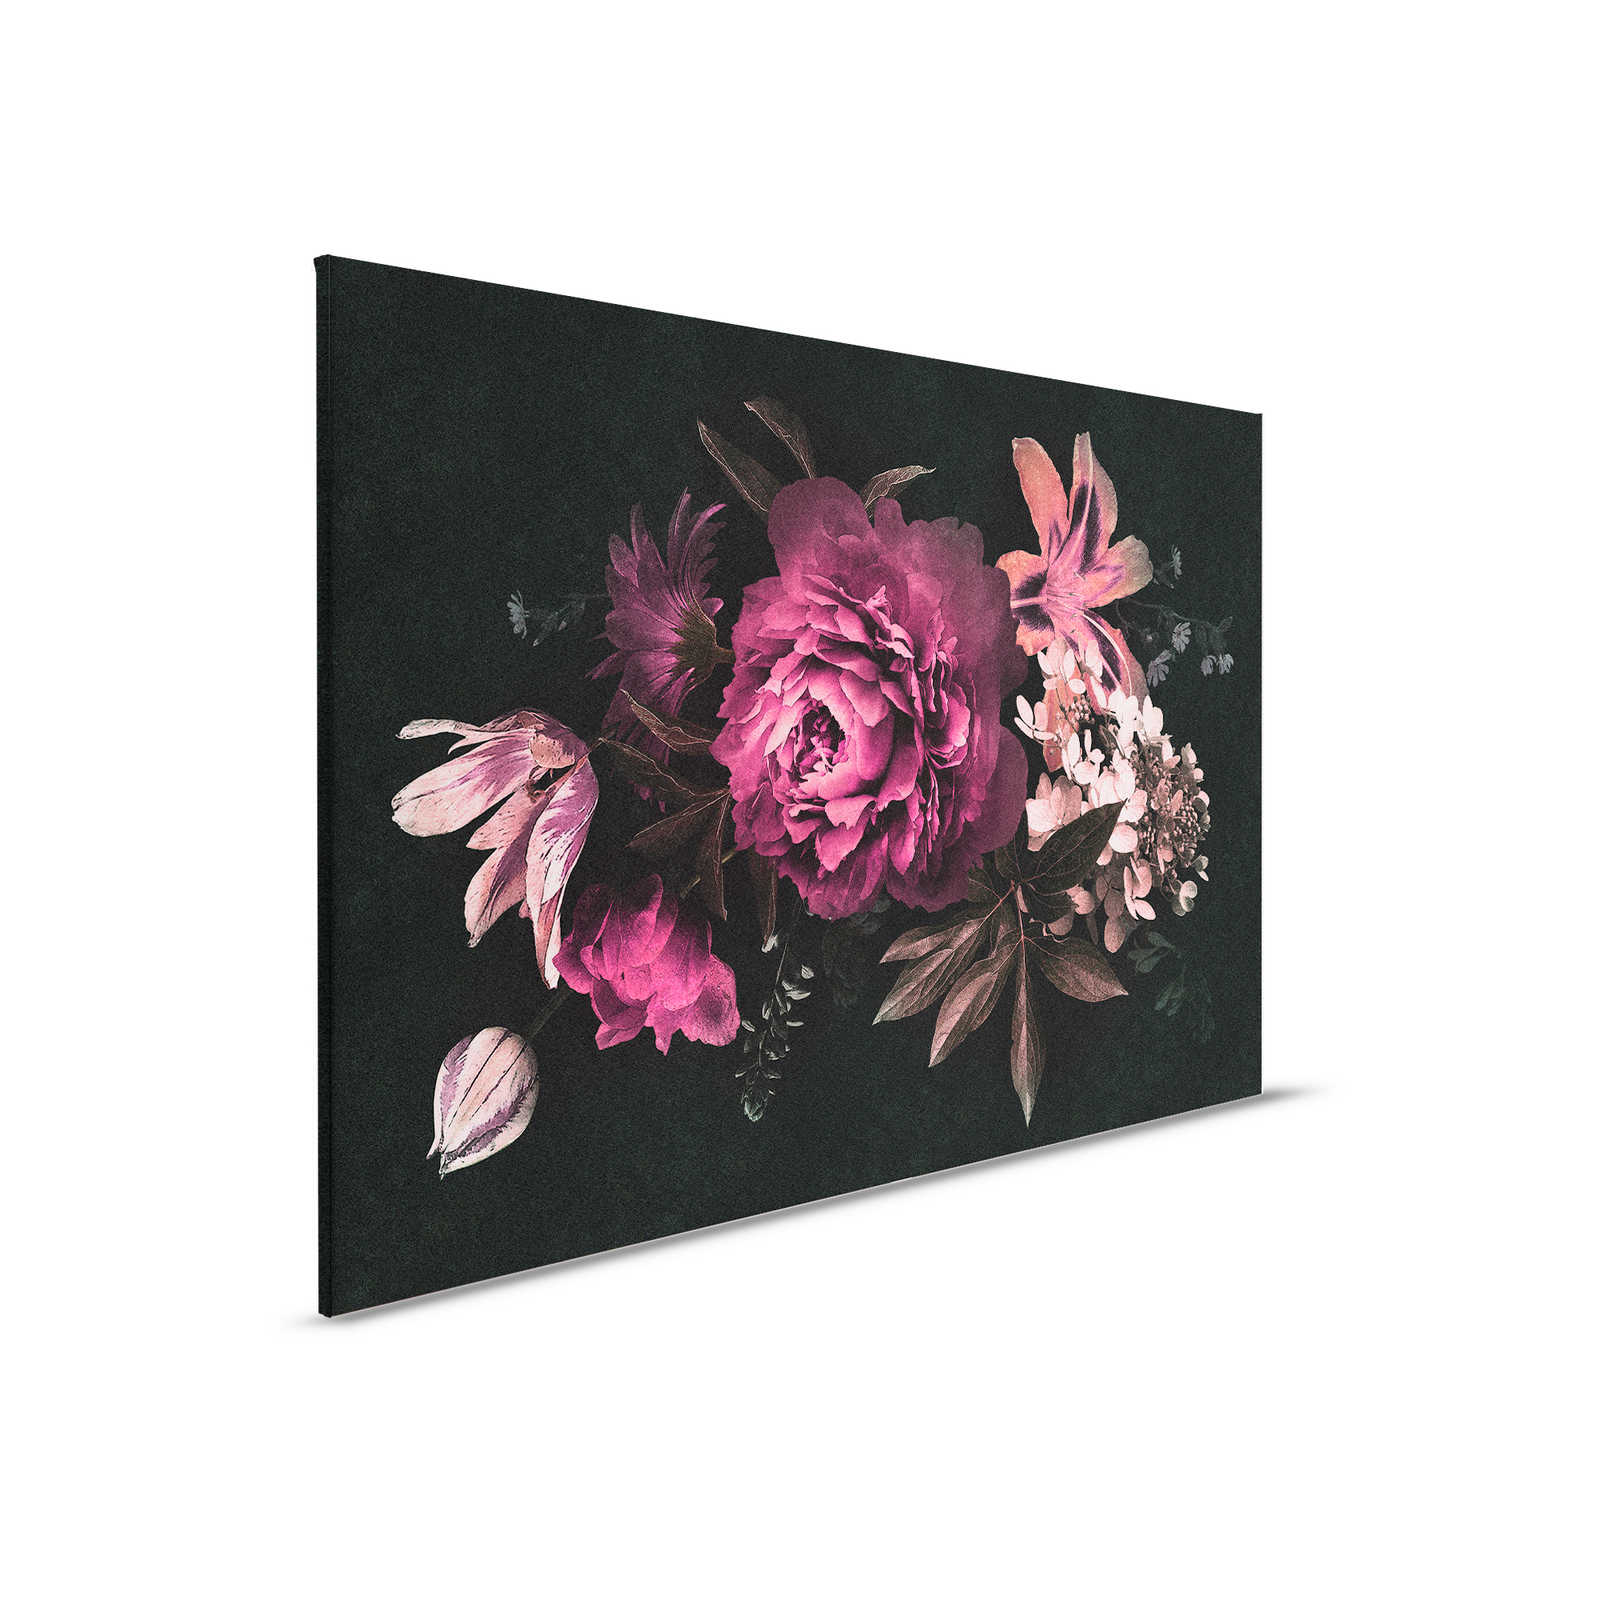         Drama queen 3 - Canvas painting romantic bouquet of flowers- Cardboard structure - 0.90 m x 0.60 m
    